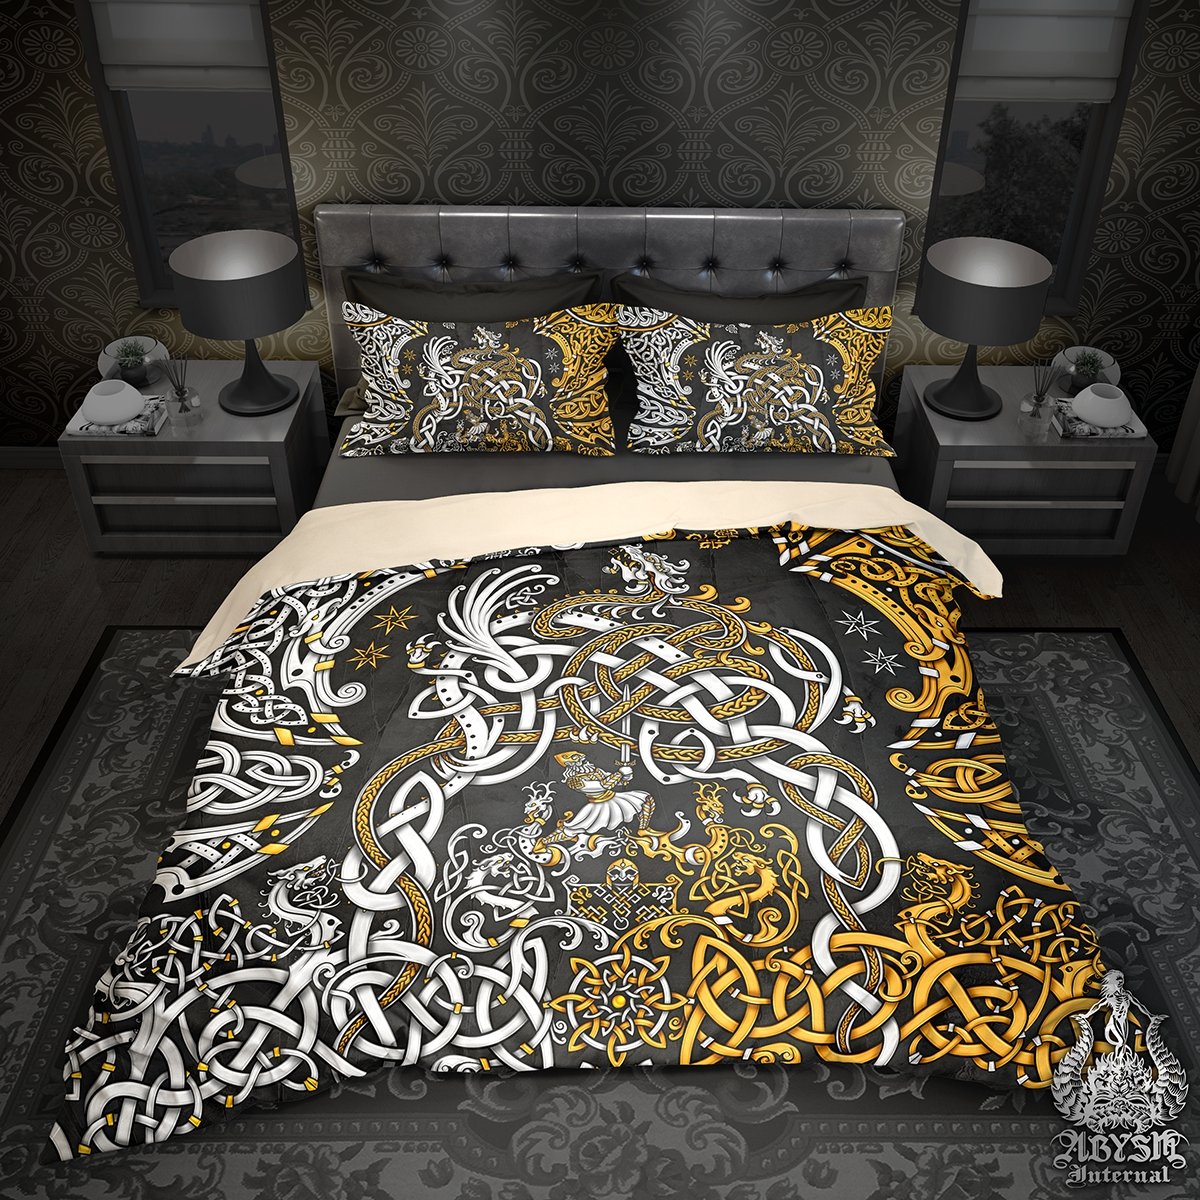 Viking Bedding Set, Comforter and Duvet, Norse Bed Cover and Bedroom Decor, Nordic Art, Sigurd kills Dragon Fafnir, King, Queen and Twin Size - Gold and Black - Abysm Internal